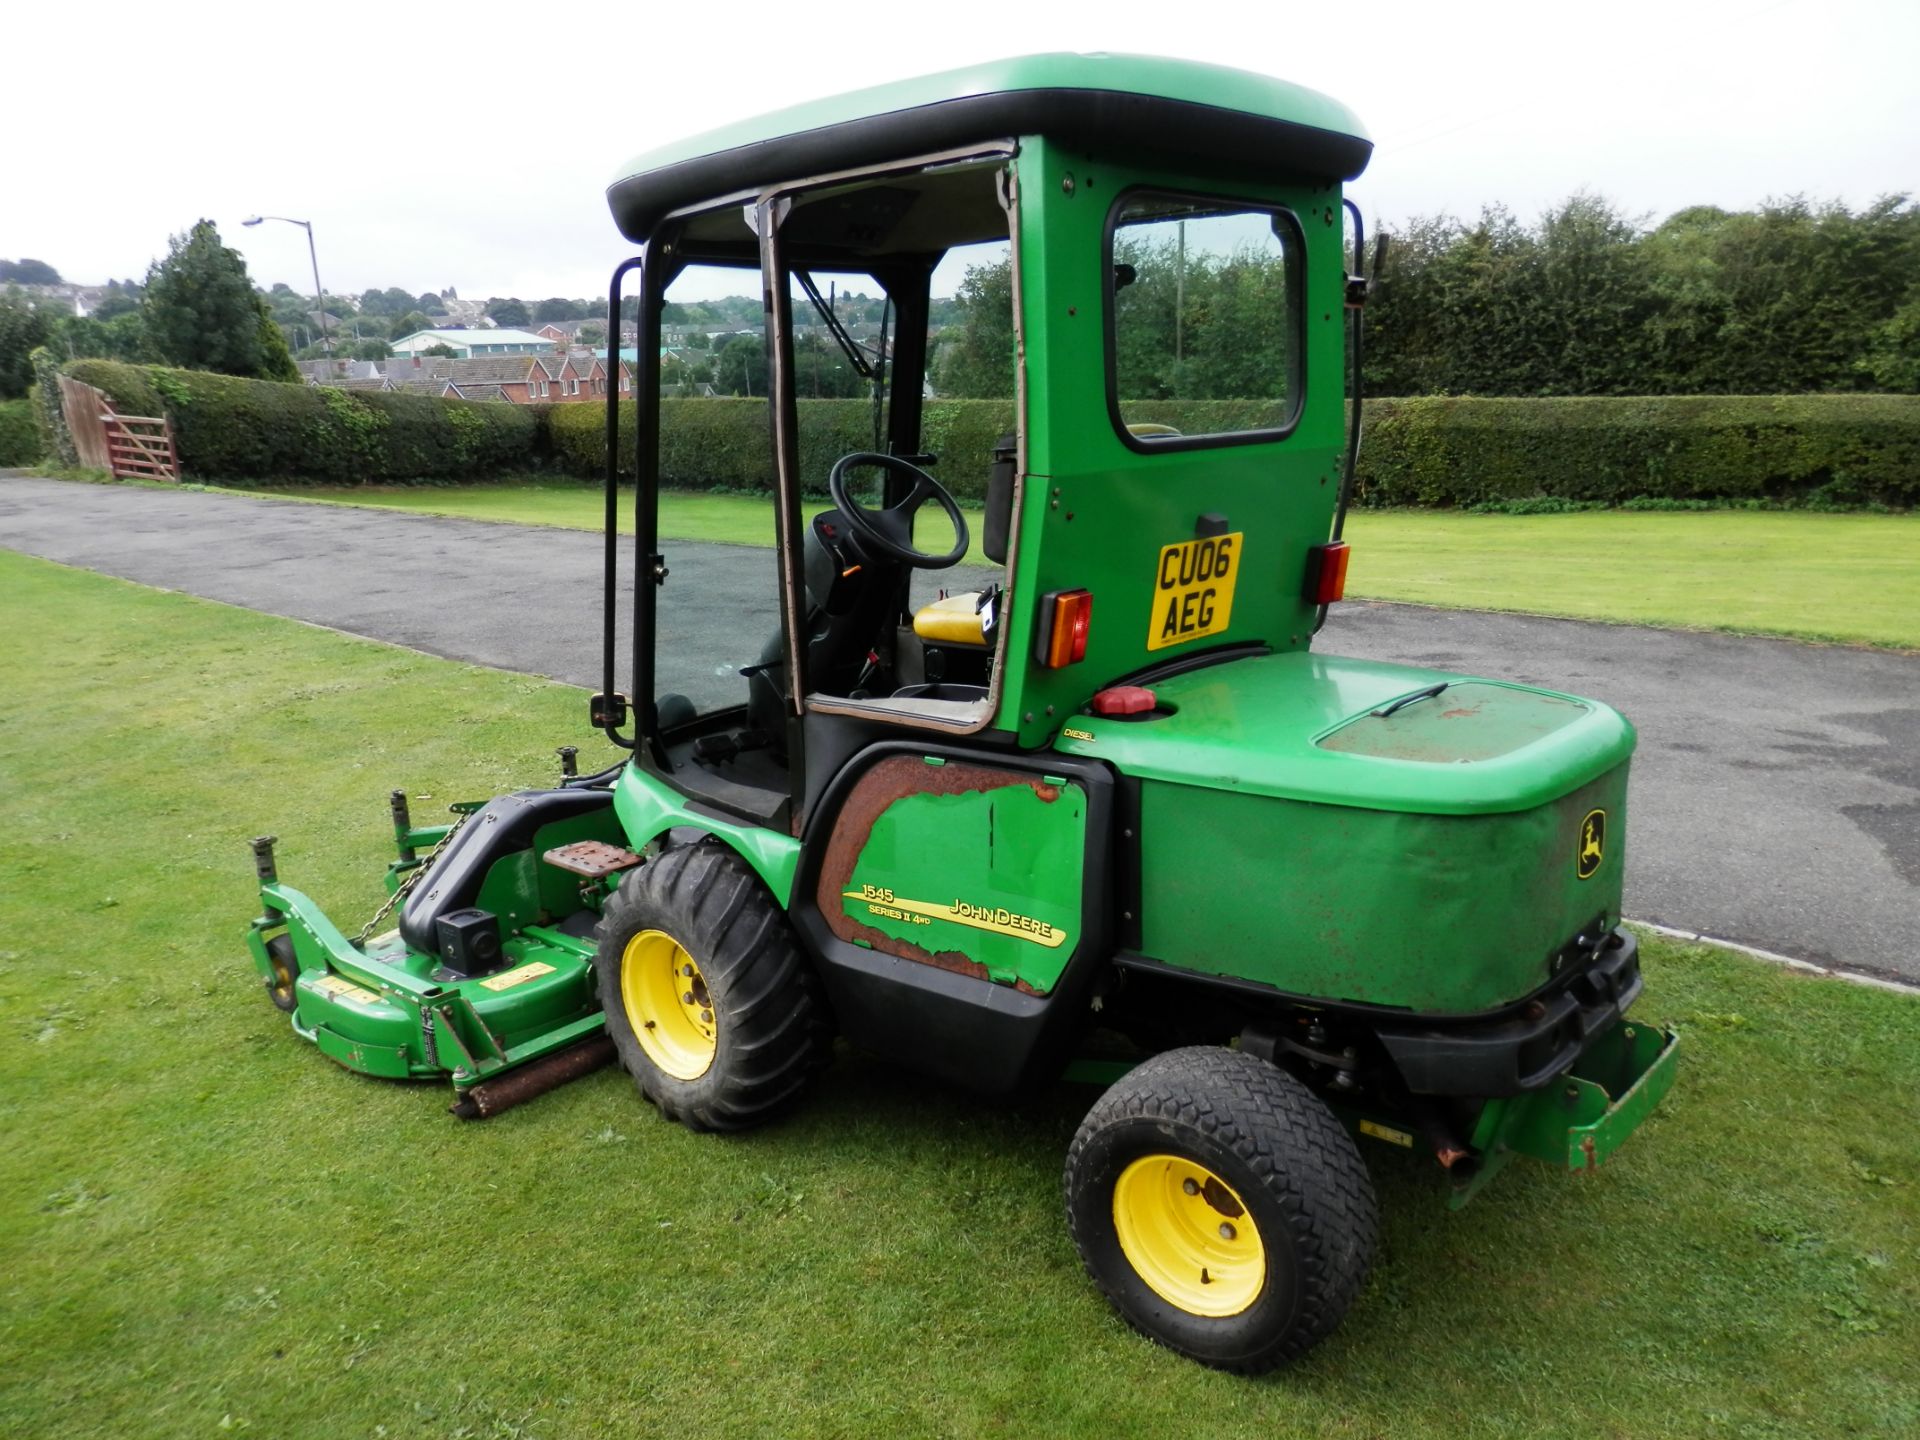 2006 JOHN DEERE 1545 SERIES 2 FRONT DECK 3 BLADE ROTARY MOWER, WIDE CUT AREA FOR LARGE ESTATES. - Image 4 of 15